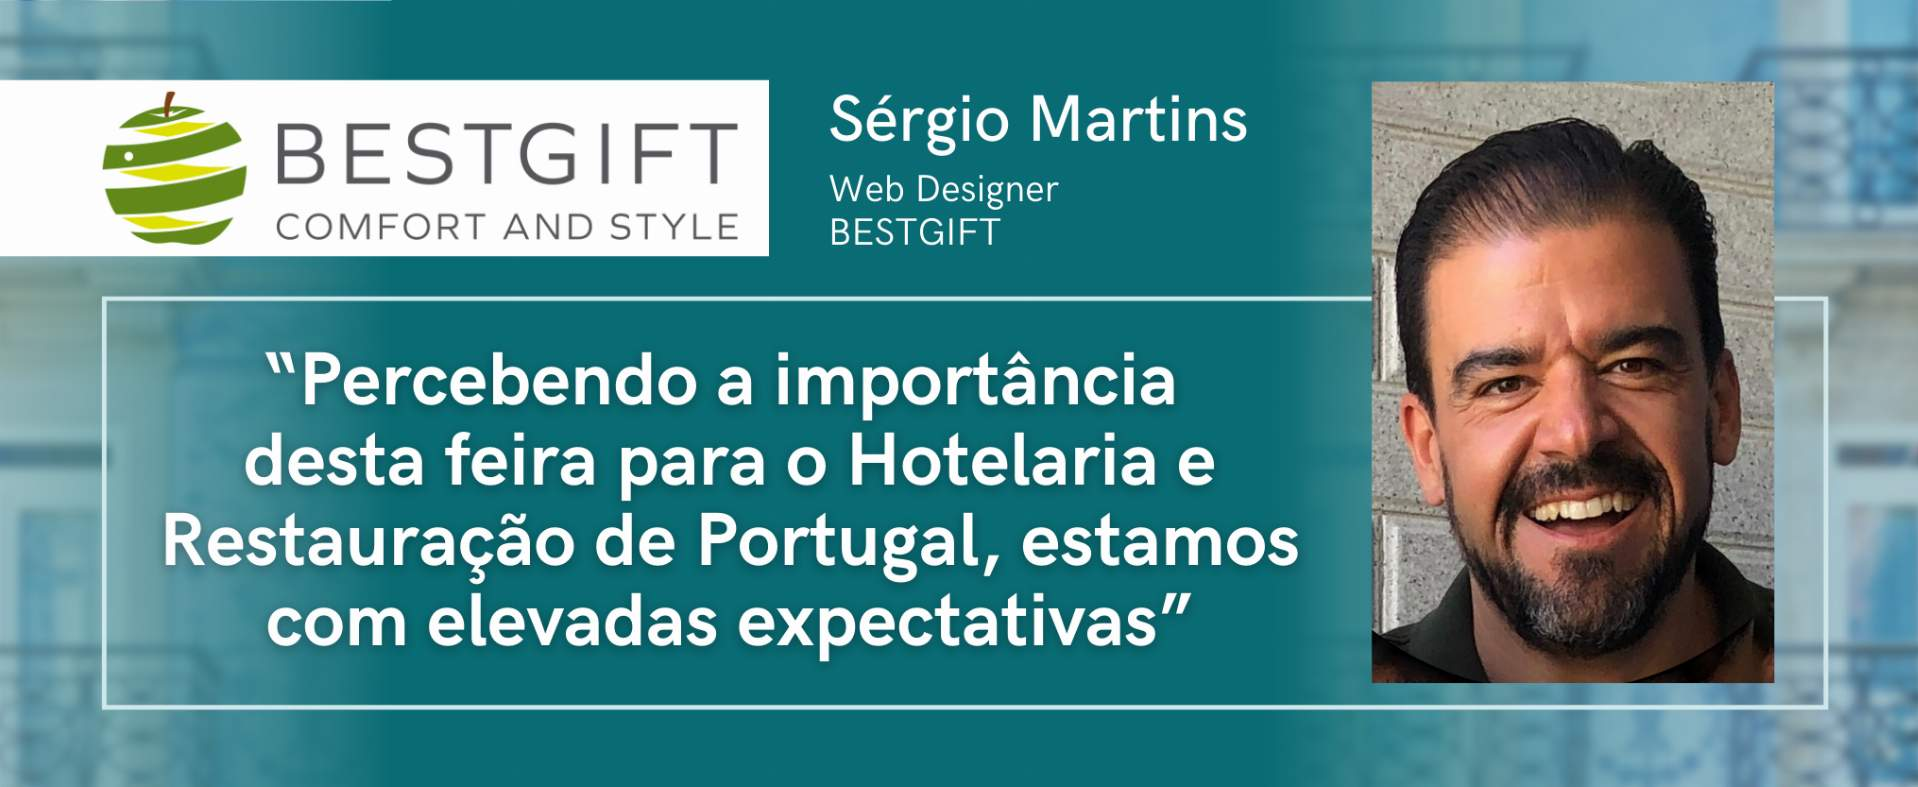 Bestgift: "Knowing the importance that this fair has for the Hotel and Restaurant Industry in Portugal, we have high expectations".